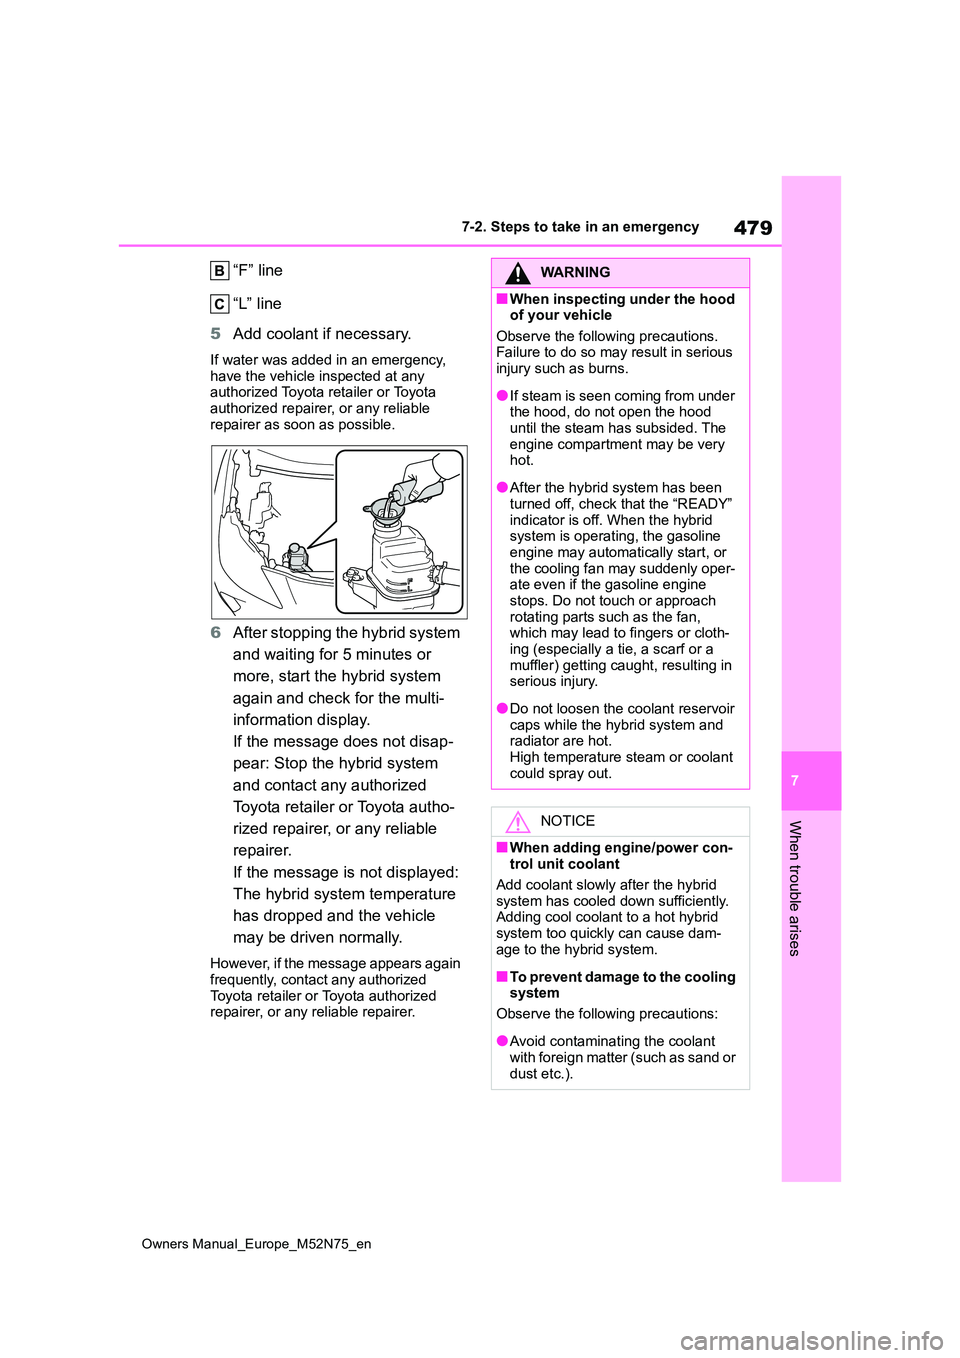 TOYOTA YARIS CROSS 2023  Owners Manual 479
7
Owners Manual_Europe_M52N75_en
7-2. Steps to take in an emergency
When trouble arises
“F” line 
“L” line 
5 Add coolant if necessary.
If water was added in an emergency,  have the vehicl